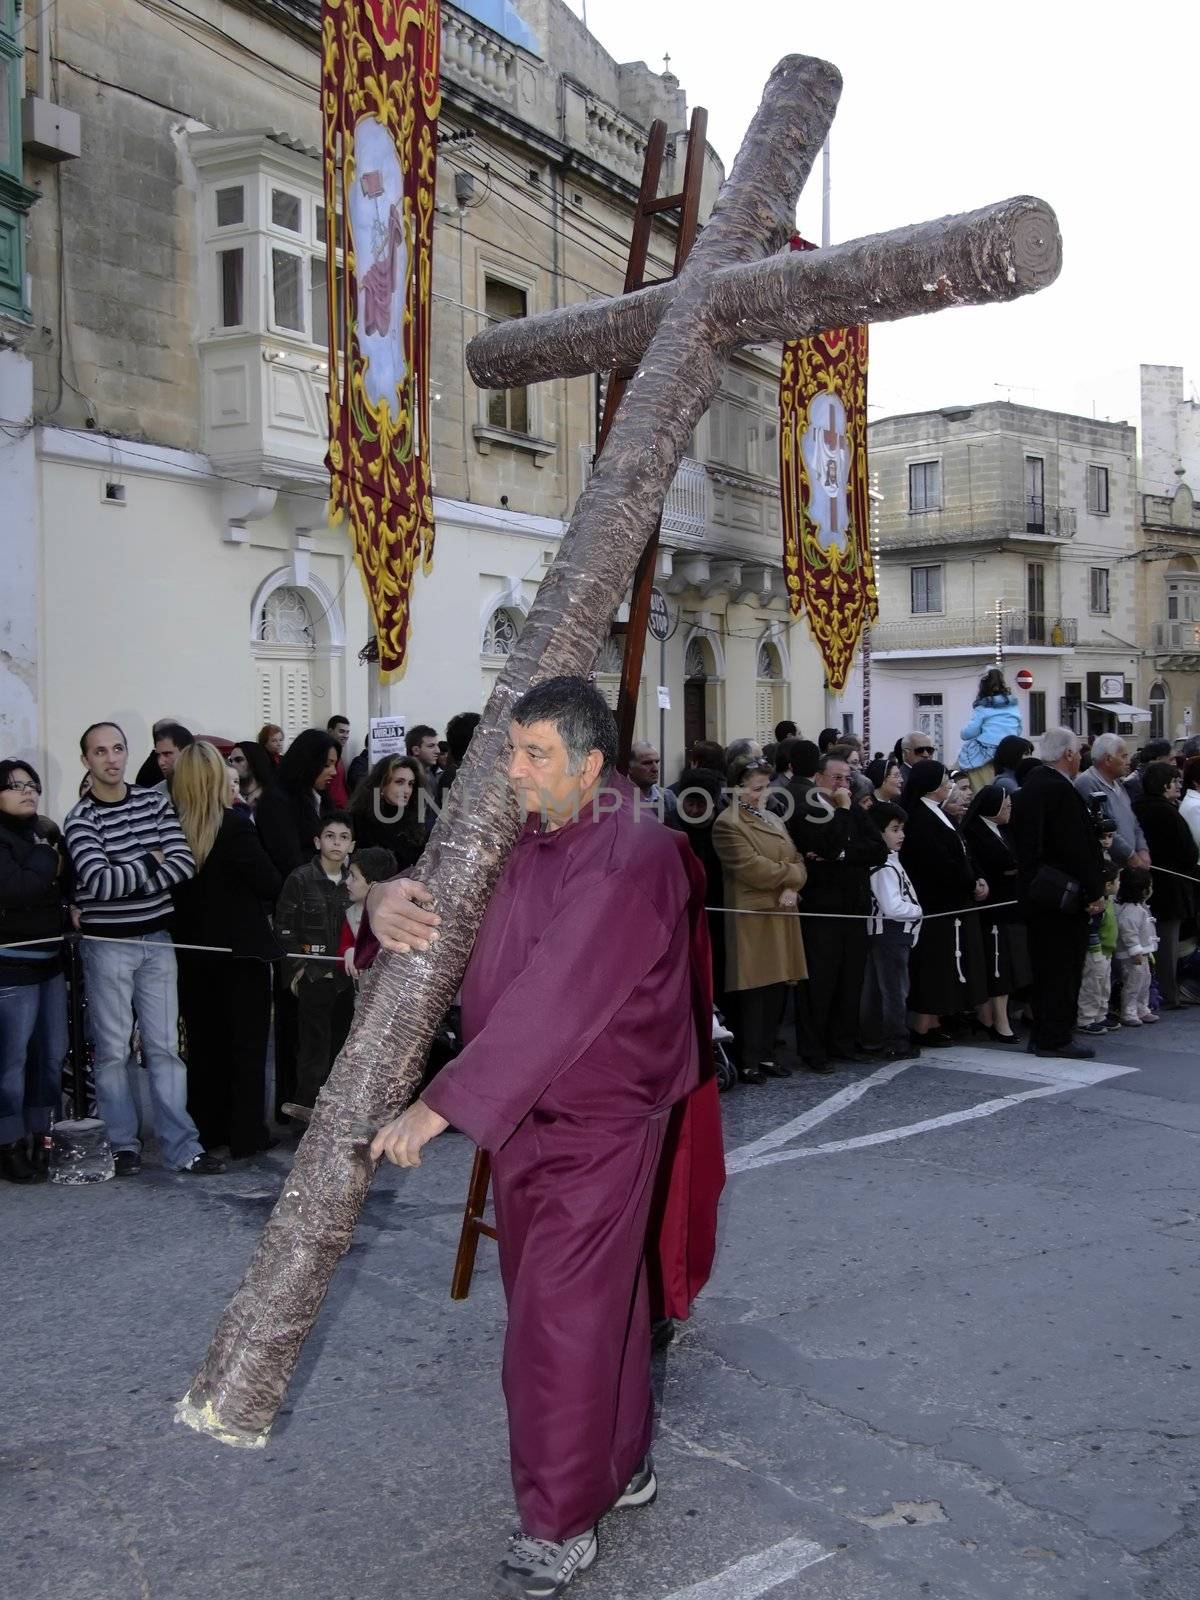 Bearer of the Cross by PhotoWorks